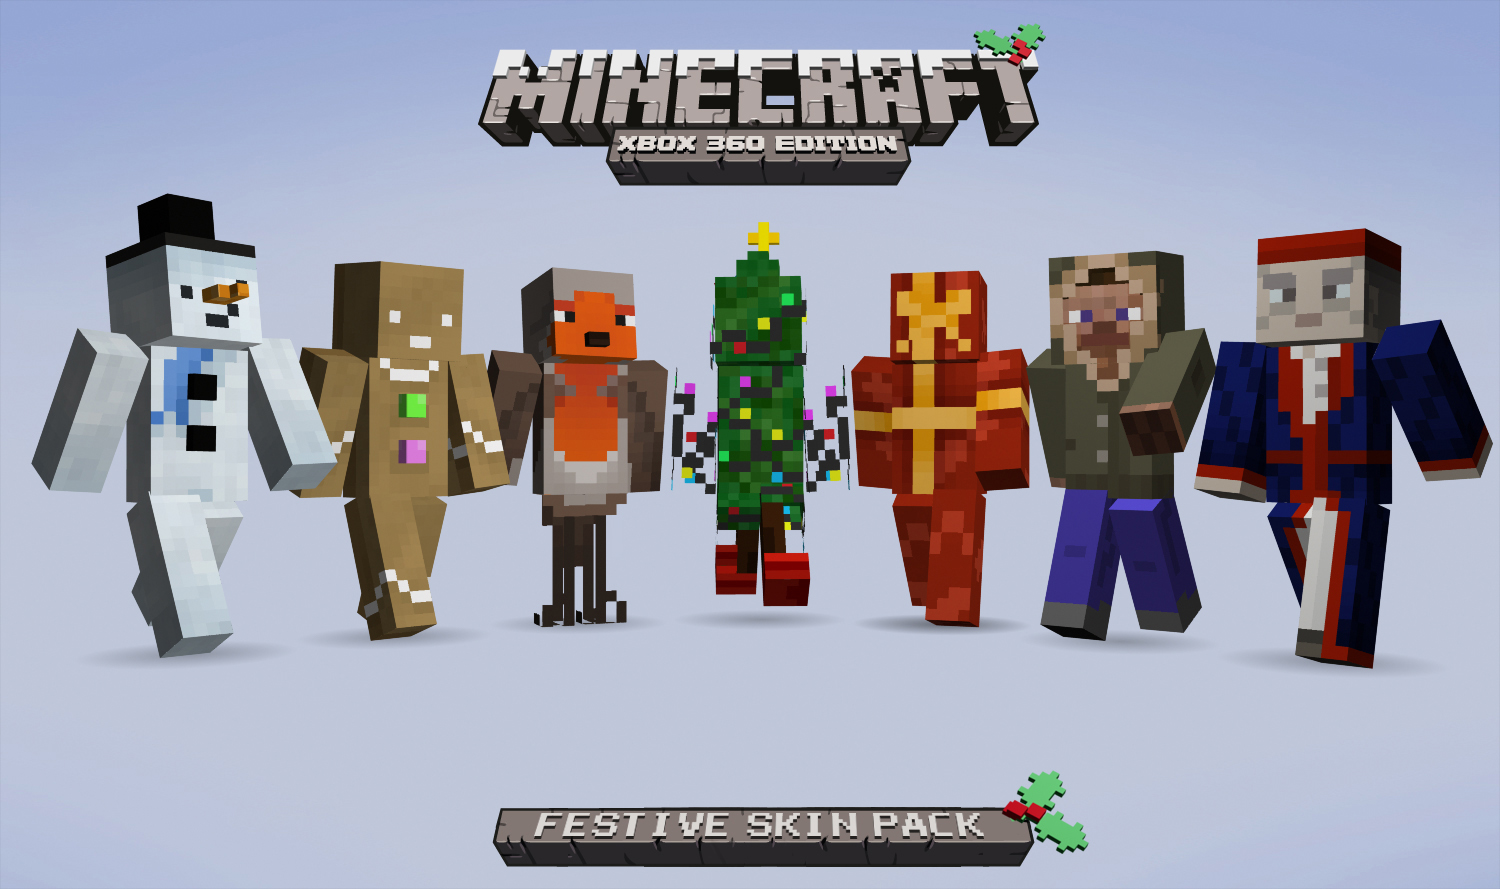 More Minecraft skins announced – XBLAFans